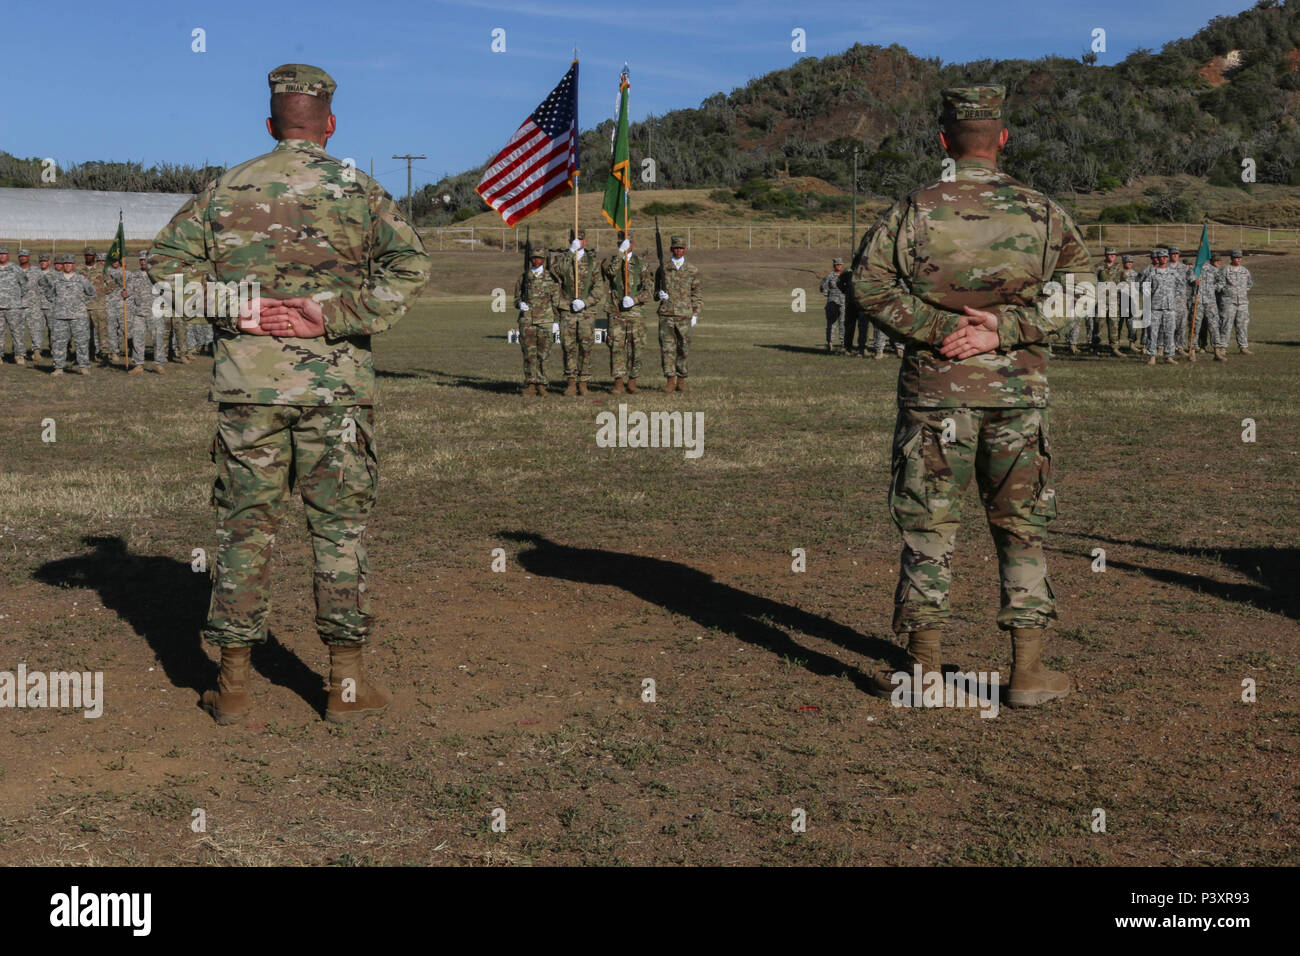 U.S. Army Lt. Col. John A. Fivian (left) and U.S. Army Lt. Col. Andrew Deaton stand in front of the 525th Military Police Detention Battalion during a change of command July 13 at U.S. Naval Station Guantanamo Bay, Cuba. Fivian turned over his command responsibilities of the Vigilant Warriors to Deaton after being the 525th MP Bn. Commander and assigned to Joint Task Force Guantanamo for two years. (Photo by U.S. Army Sgt. Sarah Kirby // RELEASED) Stock Photo